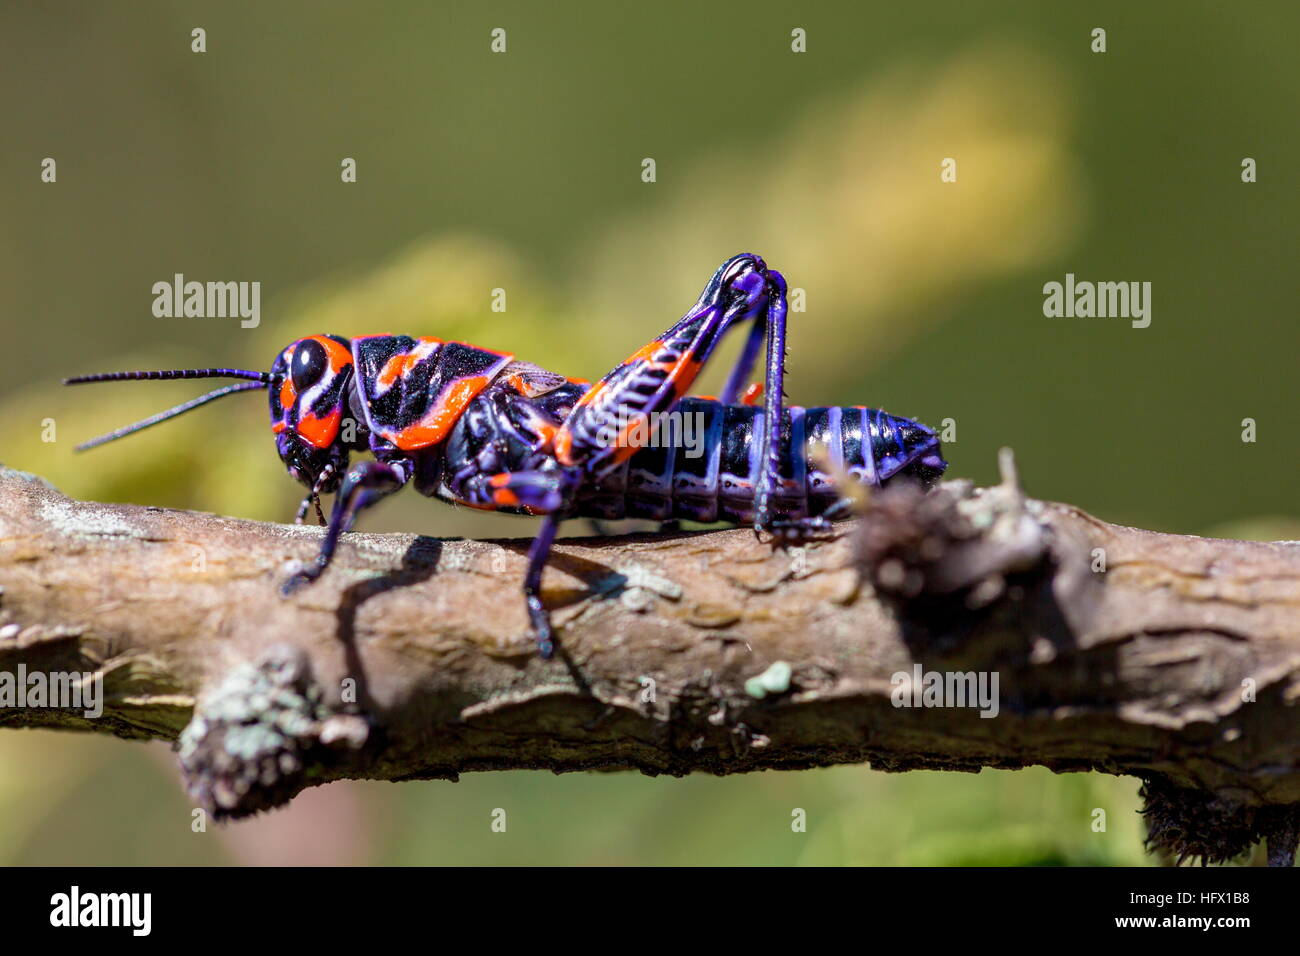 Painted grasshopper or horse lubber grasshoppers, are found in the